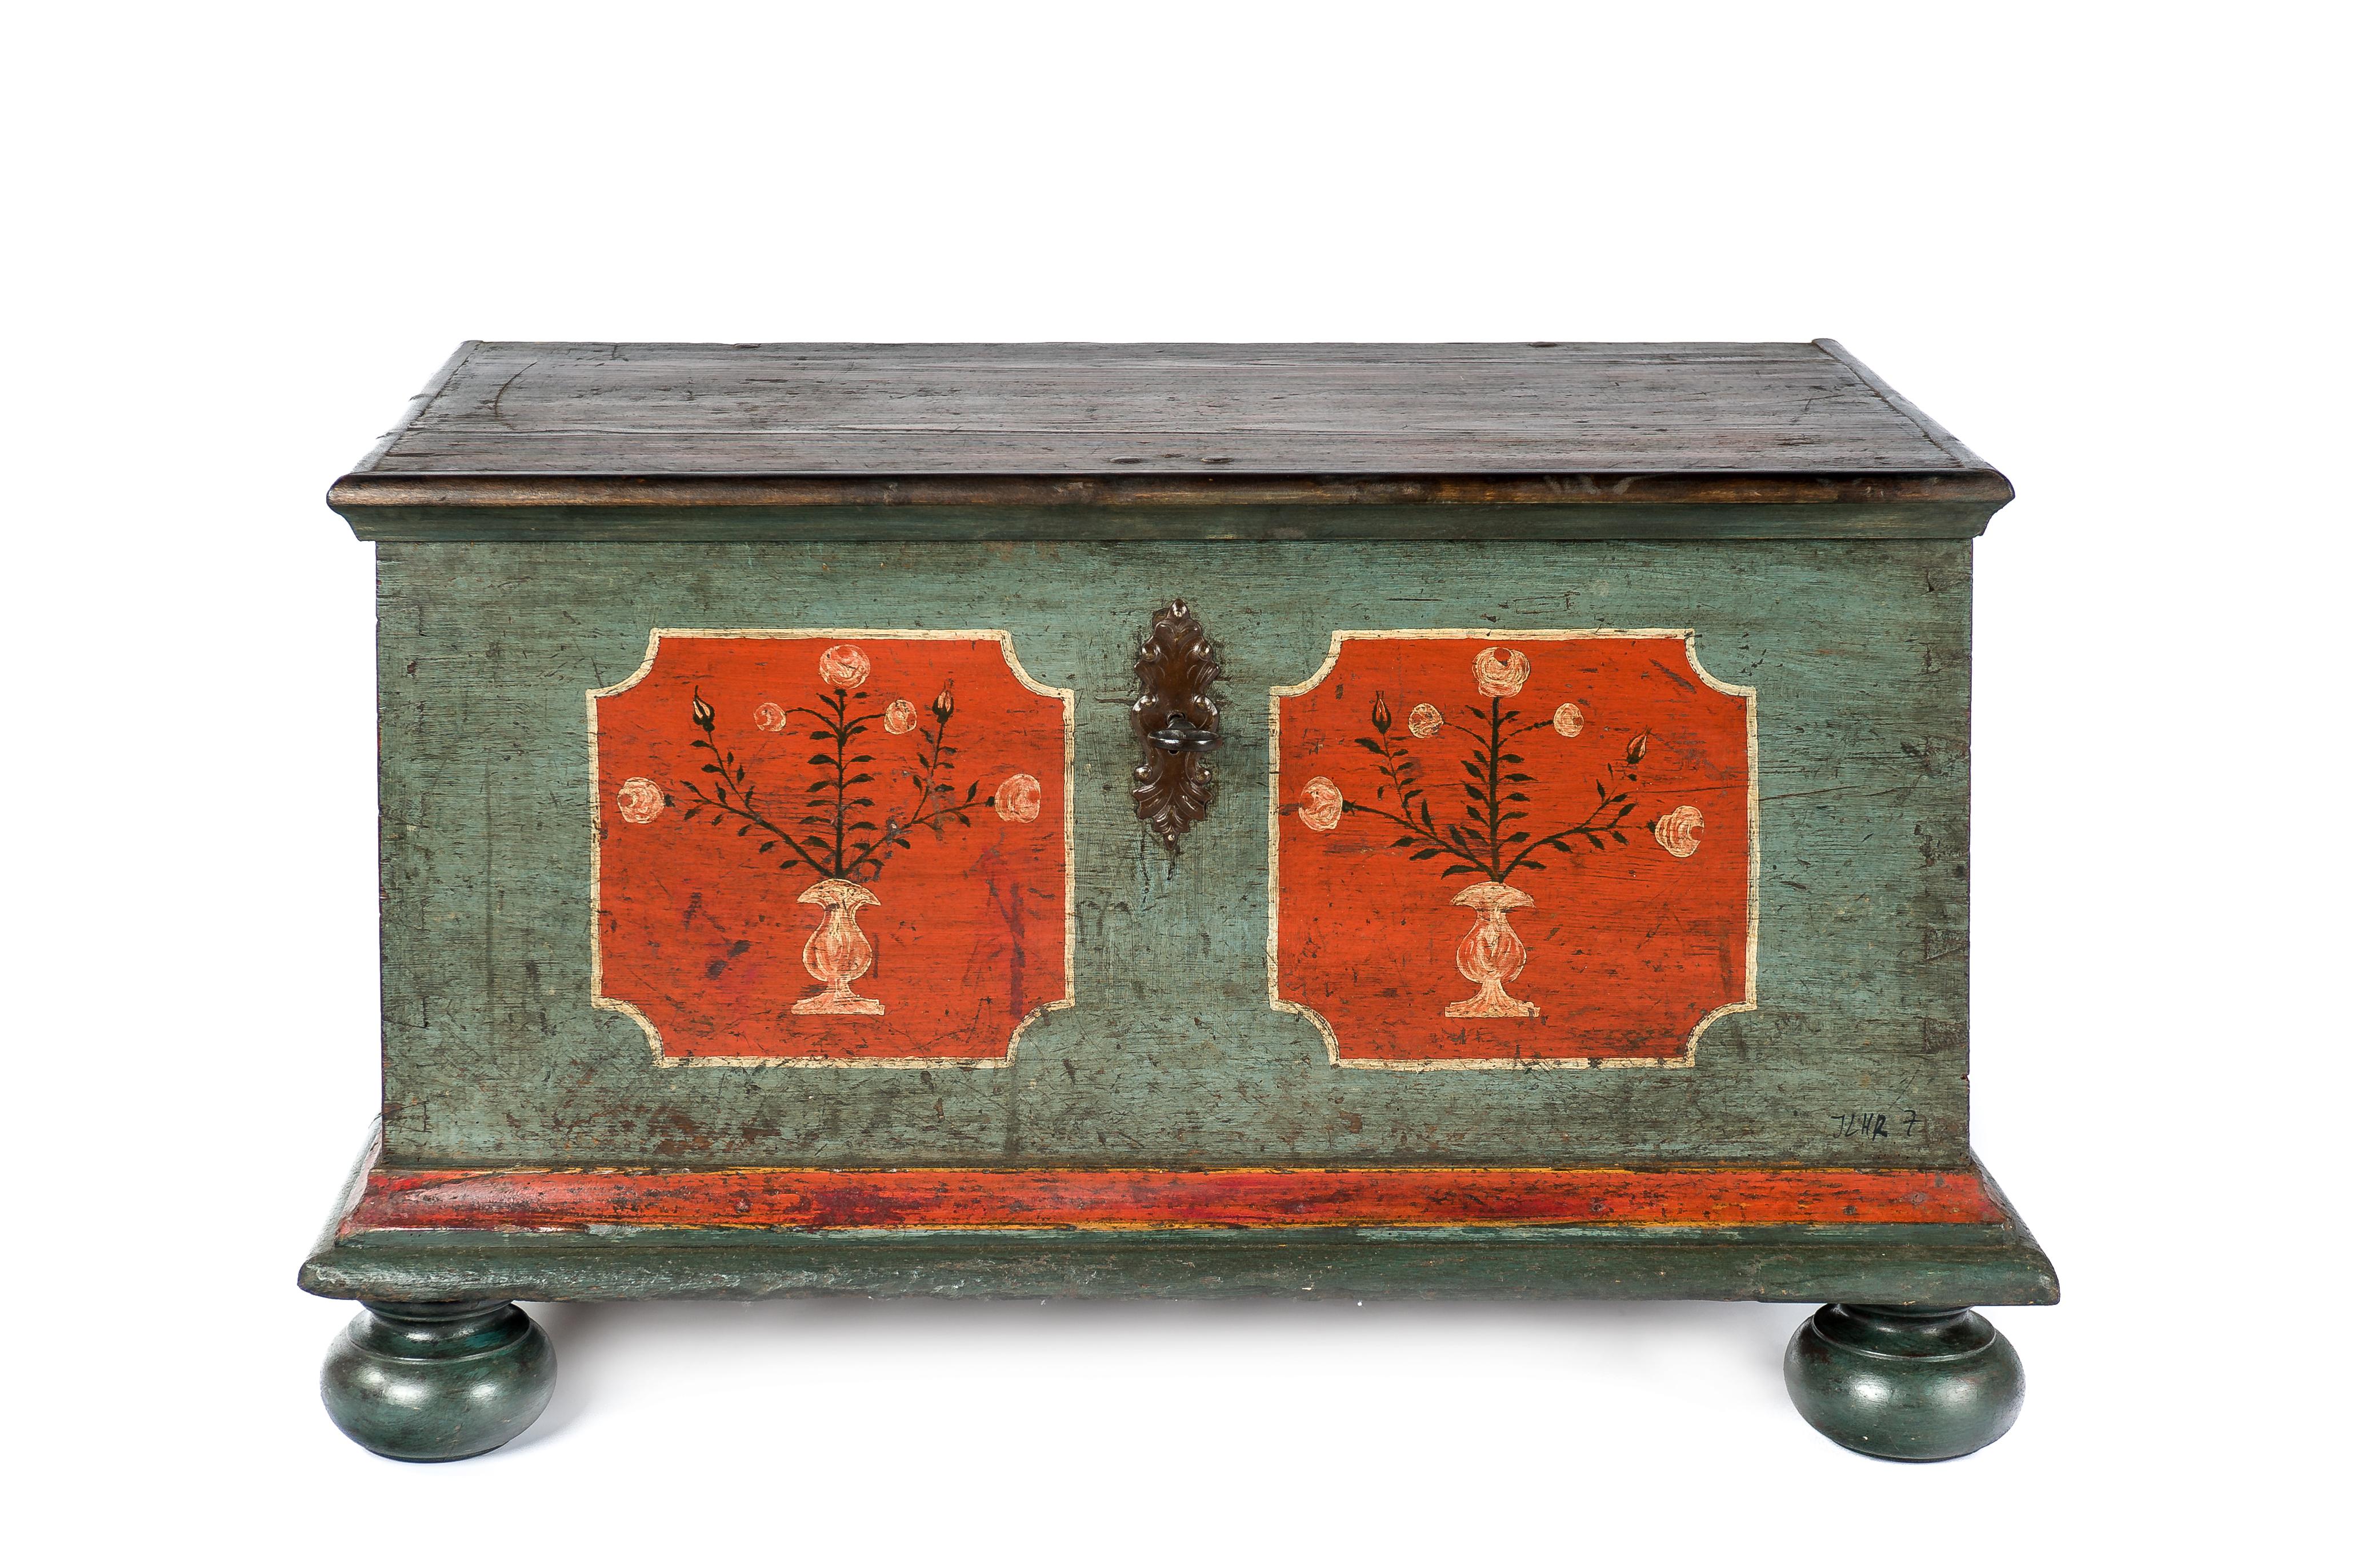 This beautiful trunk or blanket chest was made in the Northern part of Austria, at the time the center of the Habsburg monarchy. The piece was made in the late 18th century circa 1780. It was completely made in solid pine by the use of traditional